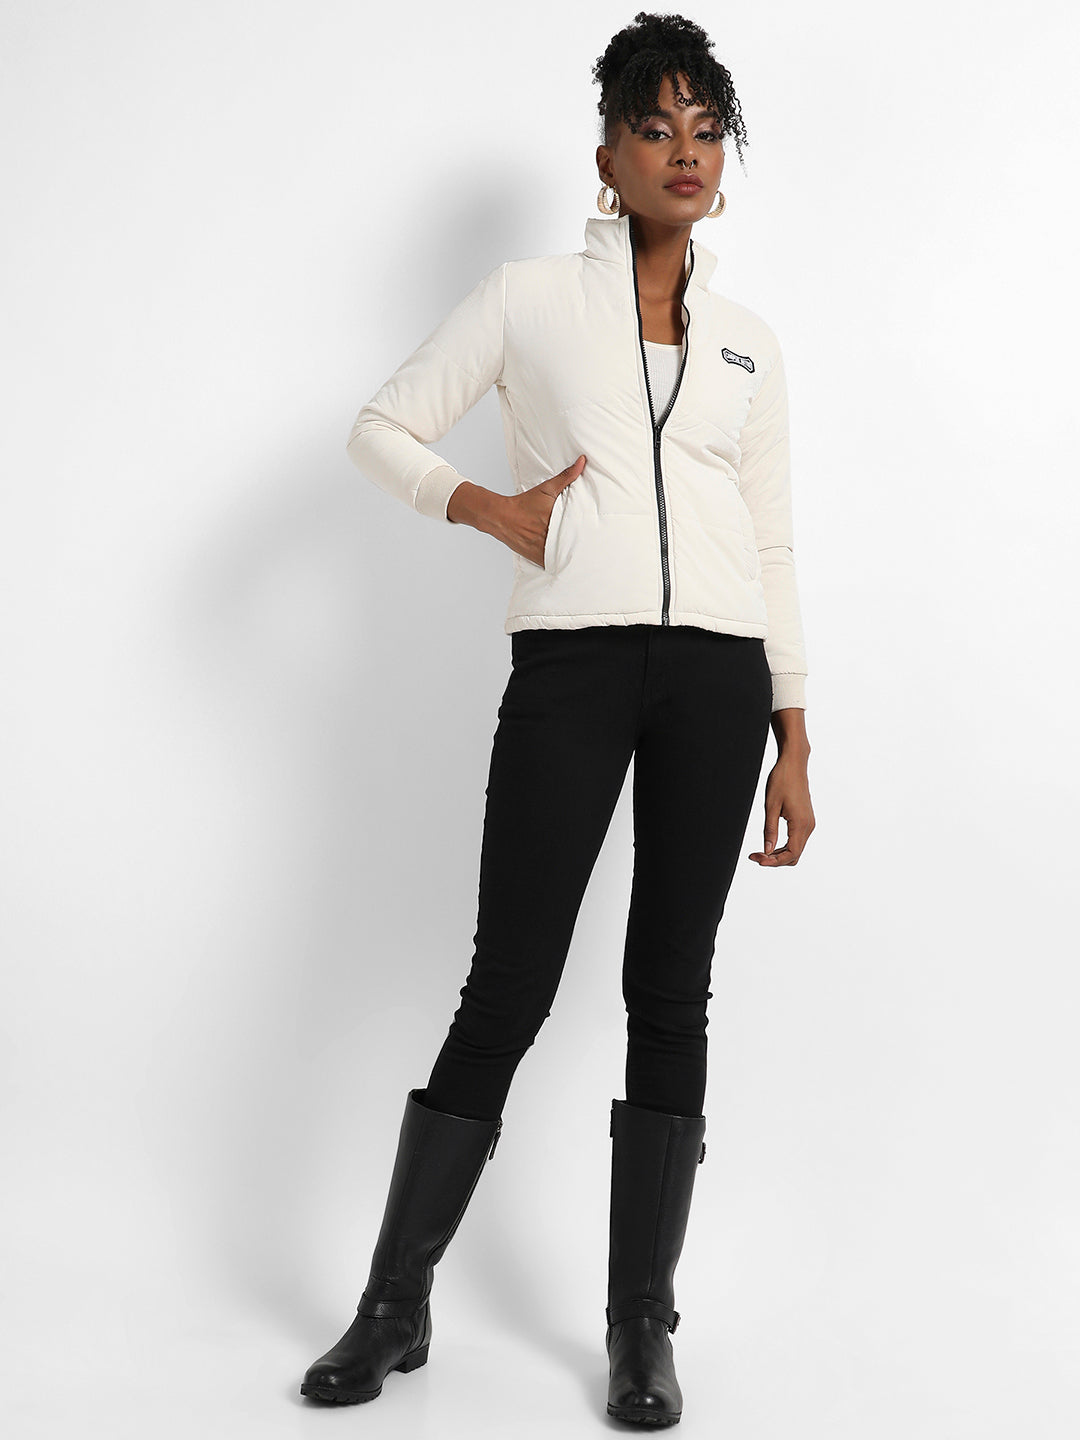 Zip-Front Bomber Jacket With Insert Pockets